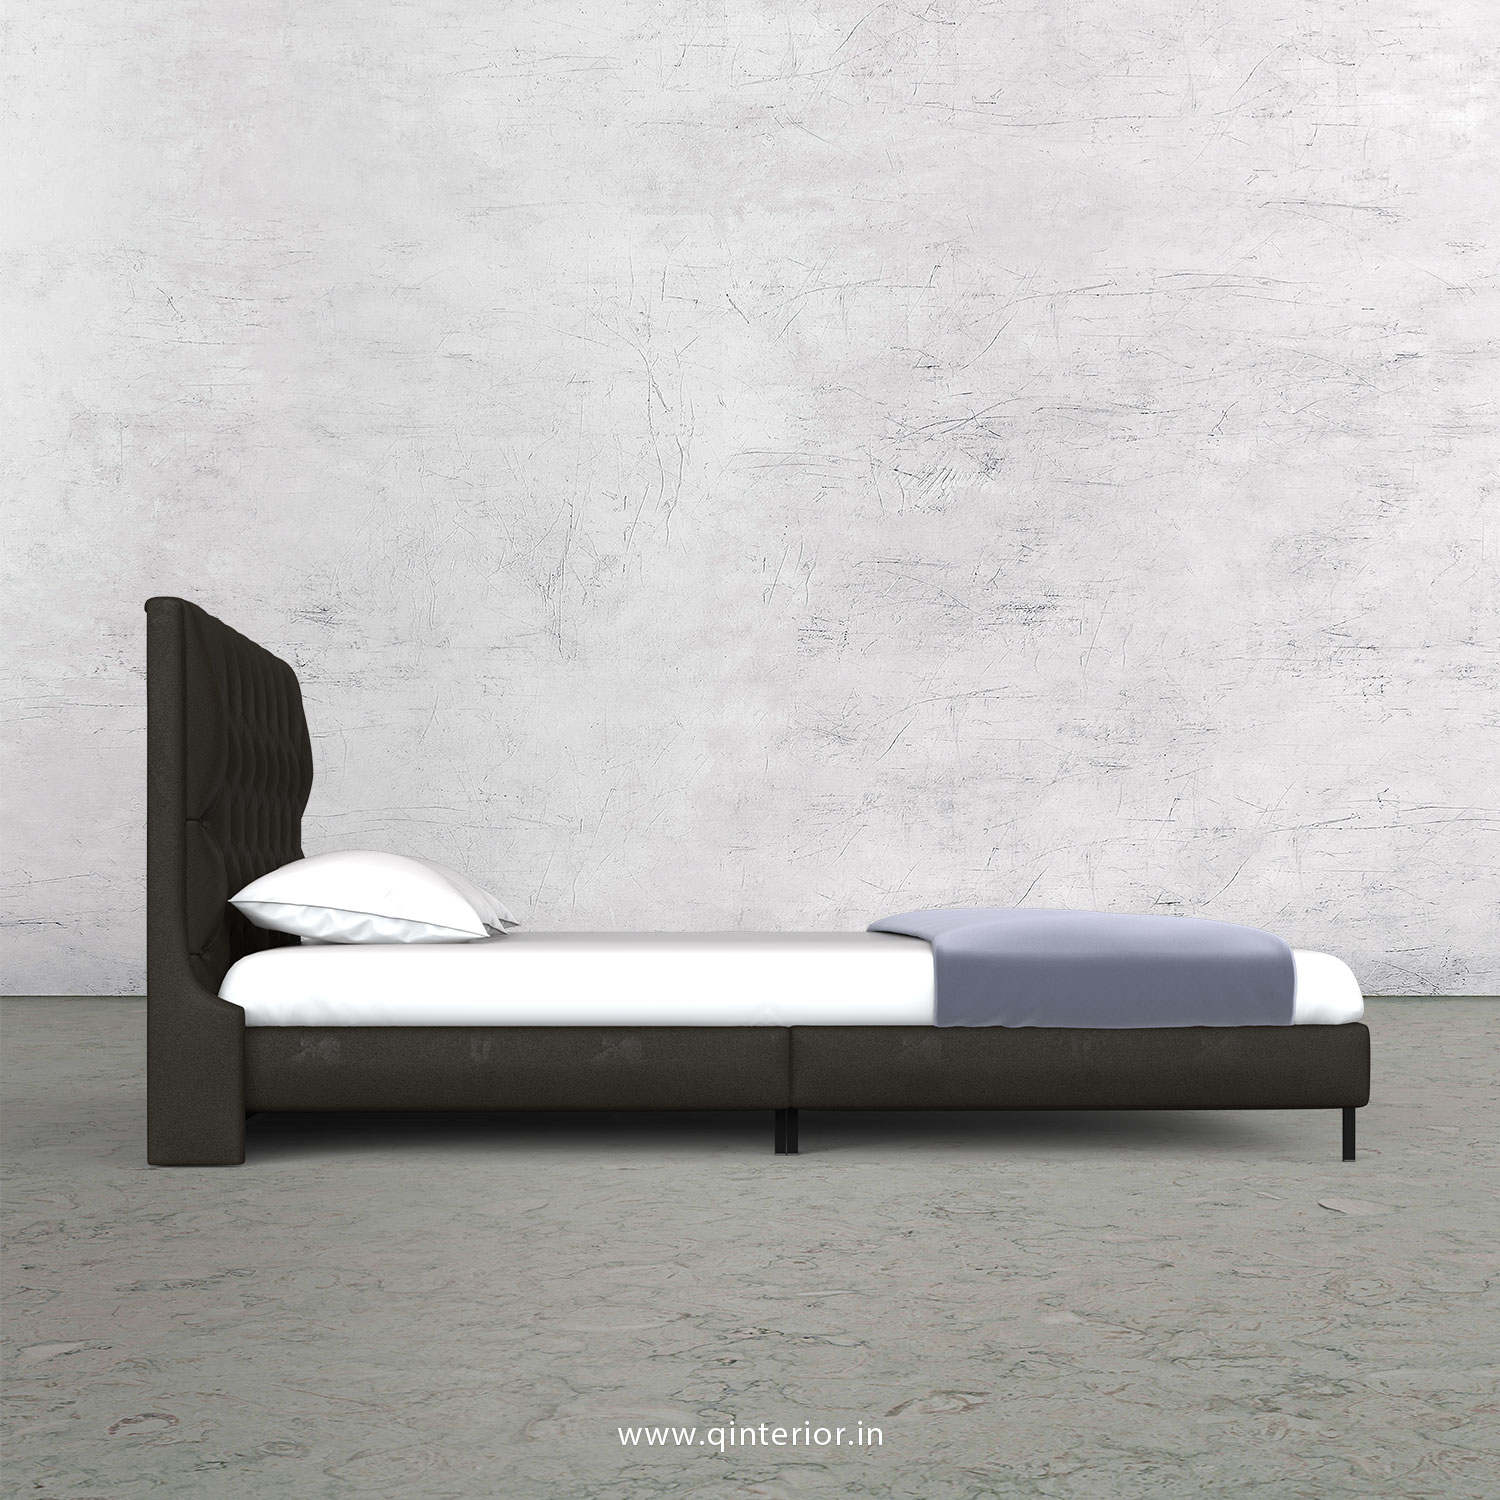 Scorpius King Size Bed in Fab Leather Fabric - KBD003 FL11